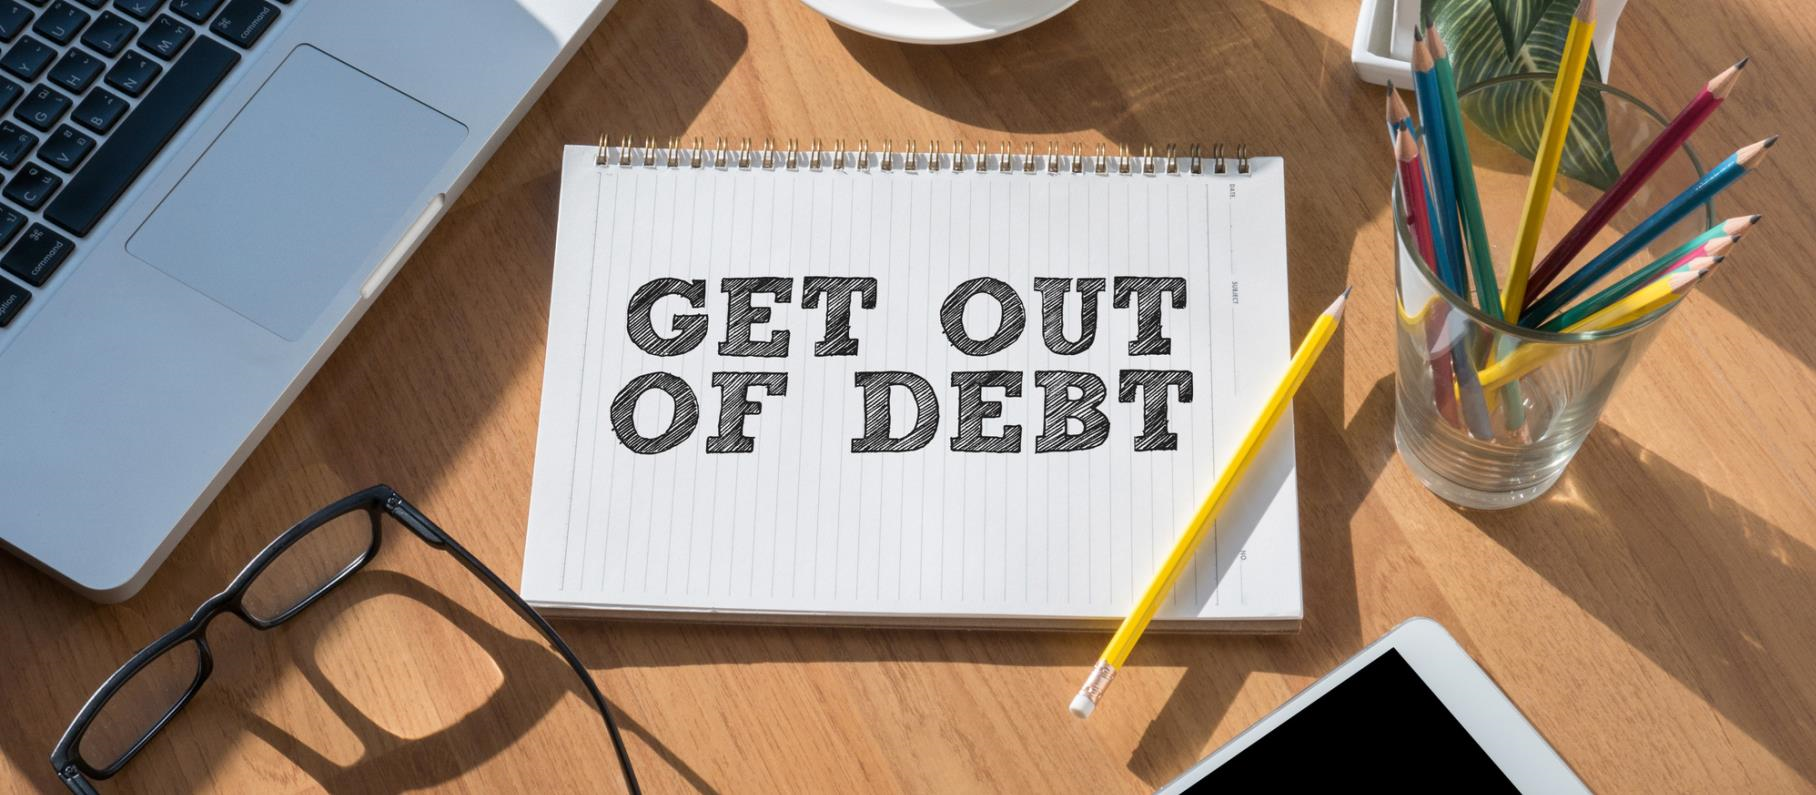 Get Out of Debt Sign - Meredith Law Firm, LLC - Debt Relief Attorney - North Charleston, SC